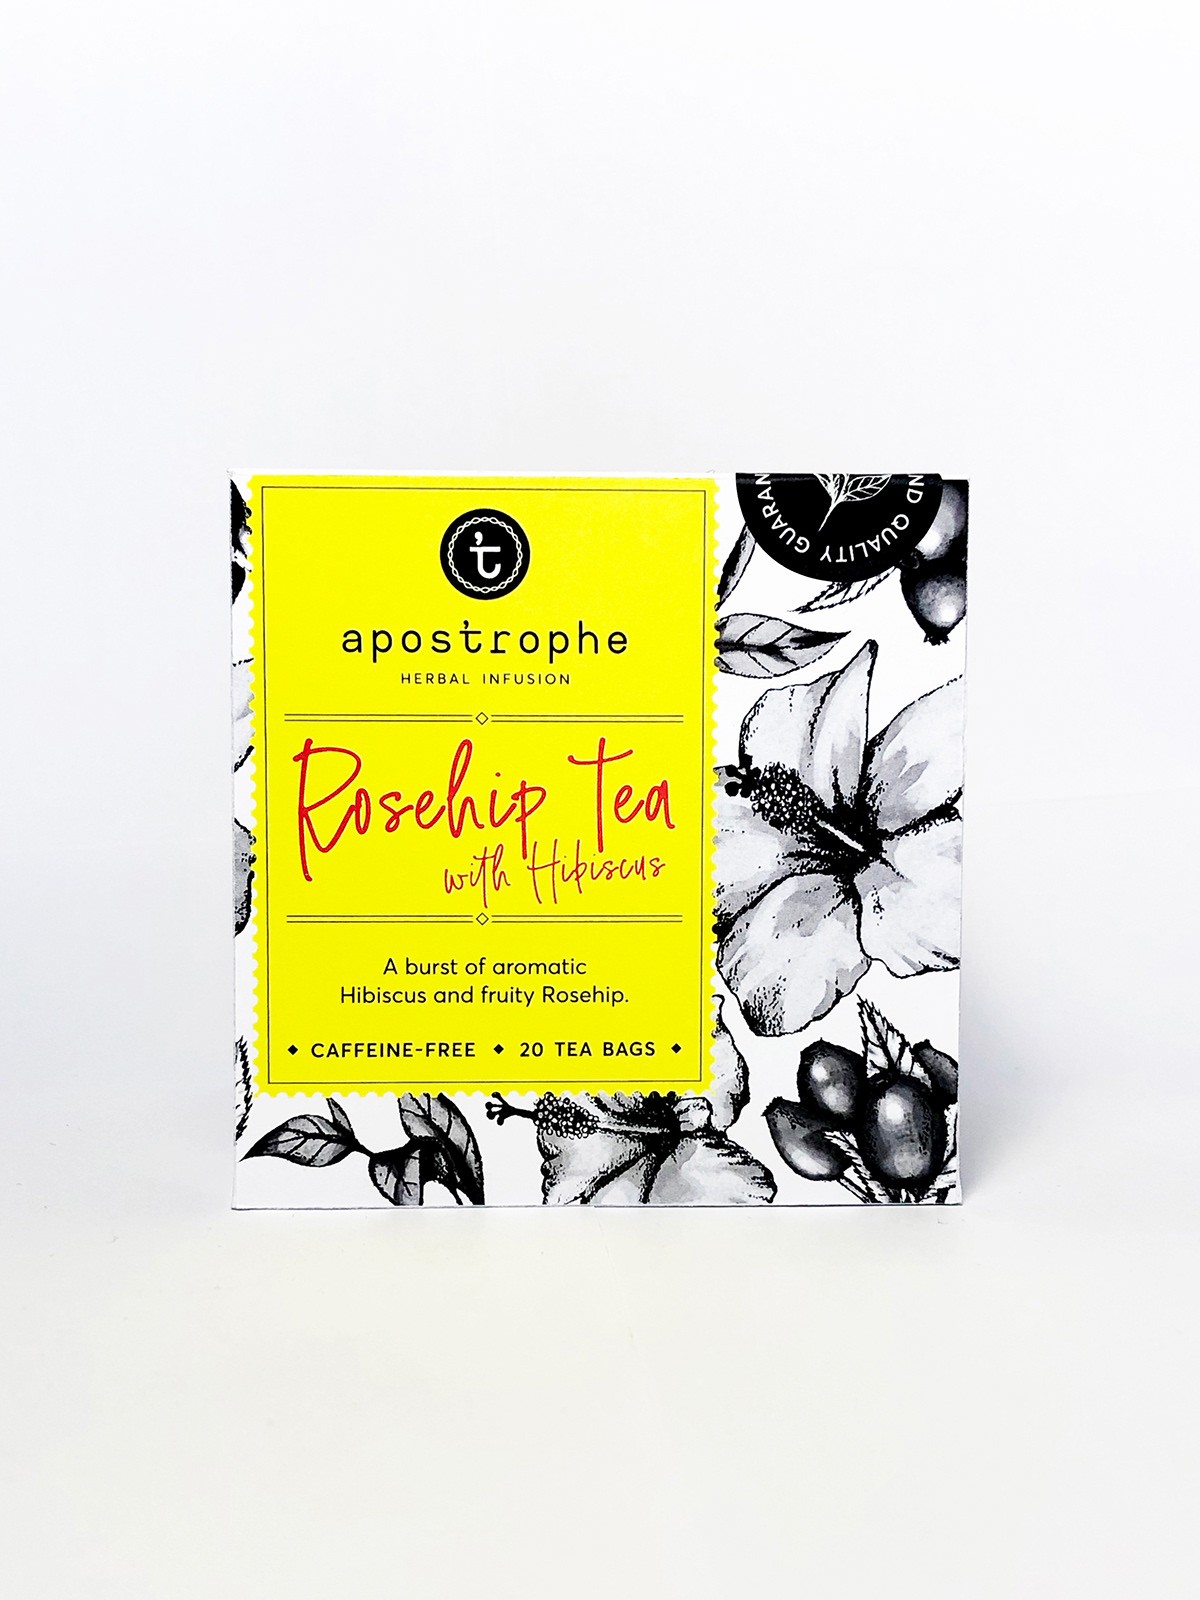 Designers Concept for Tea Brand and Packaging Design